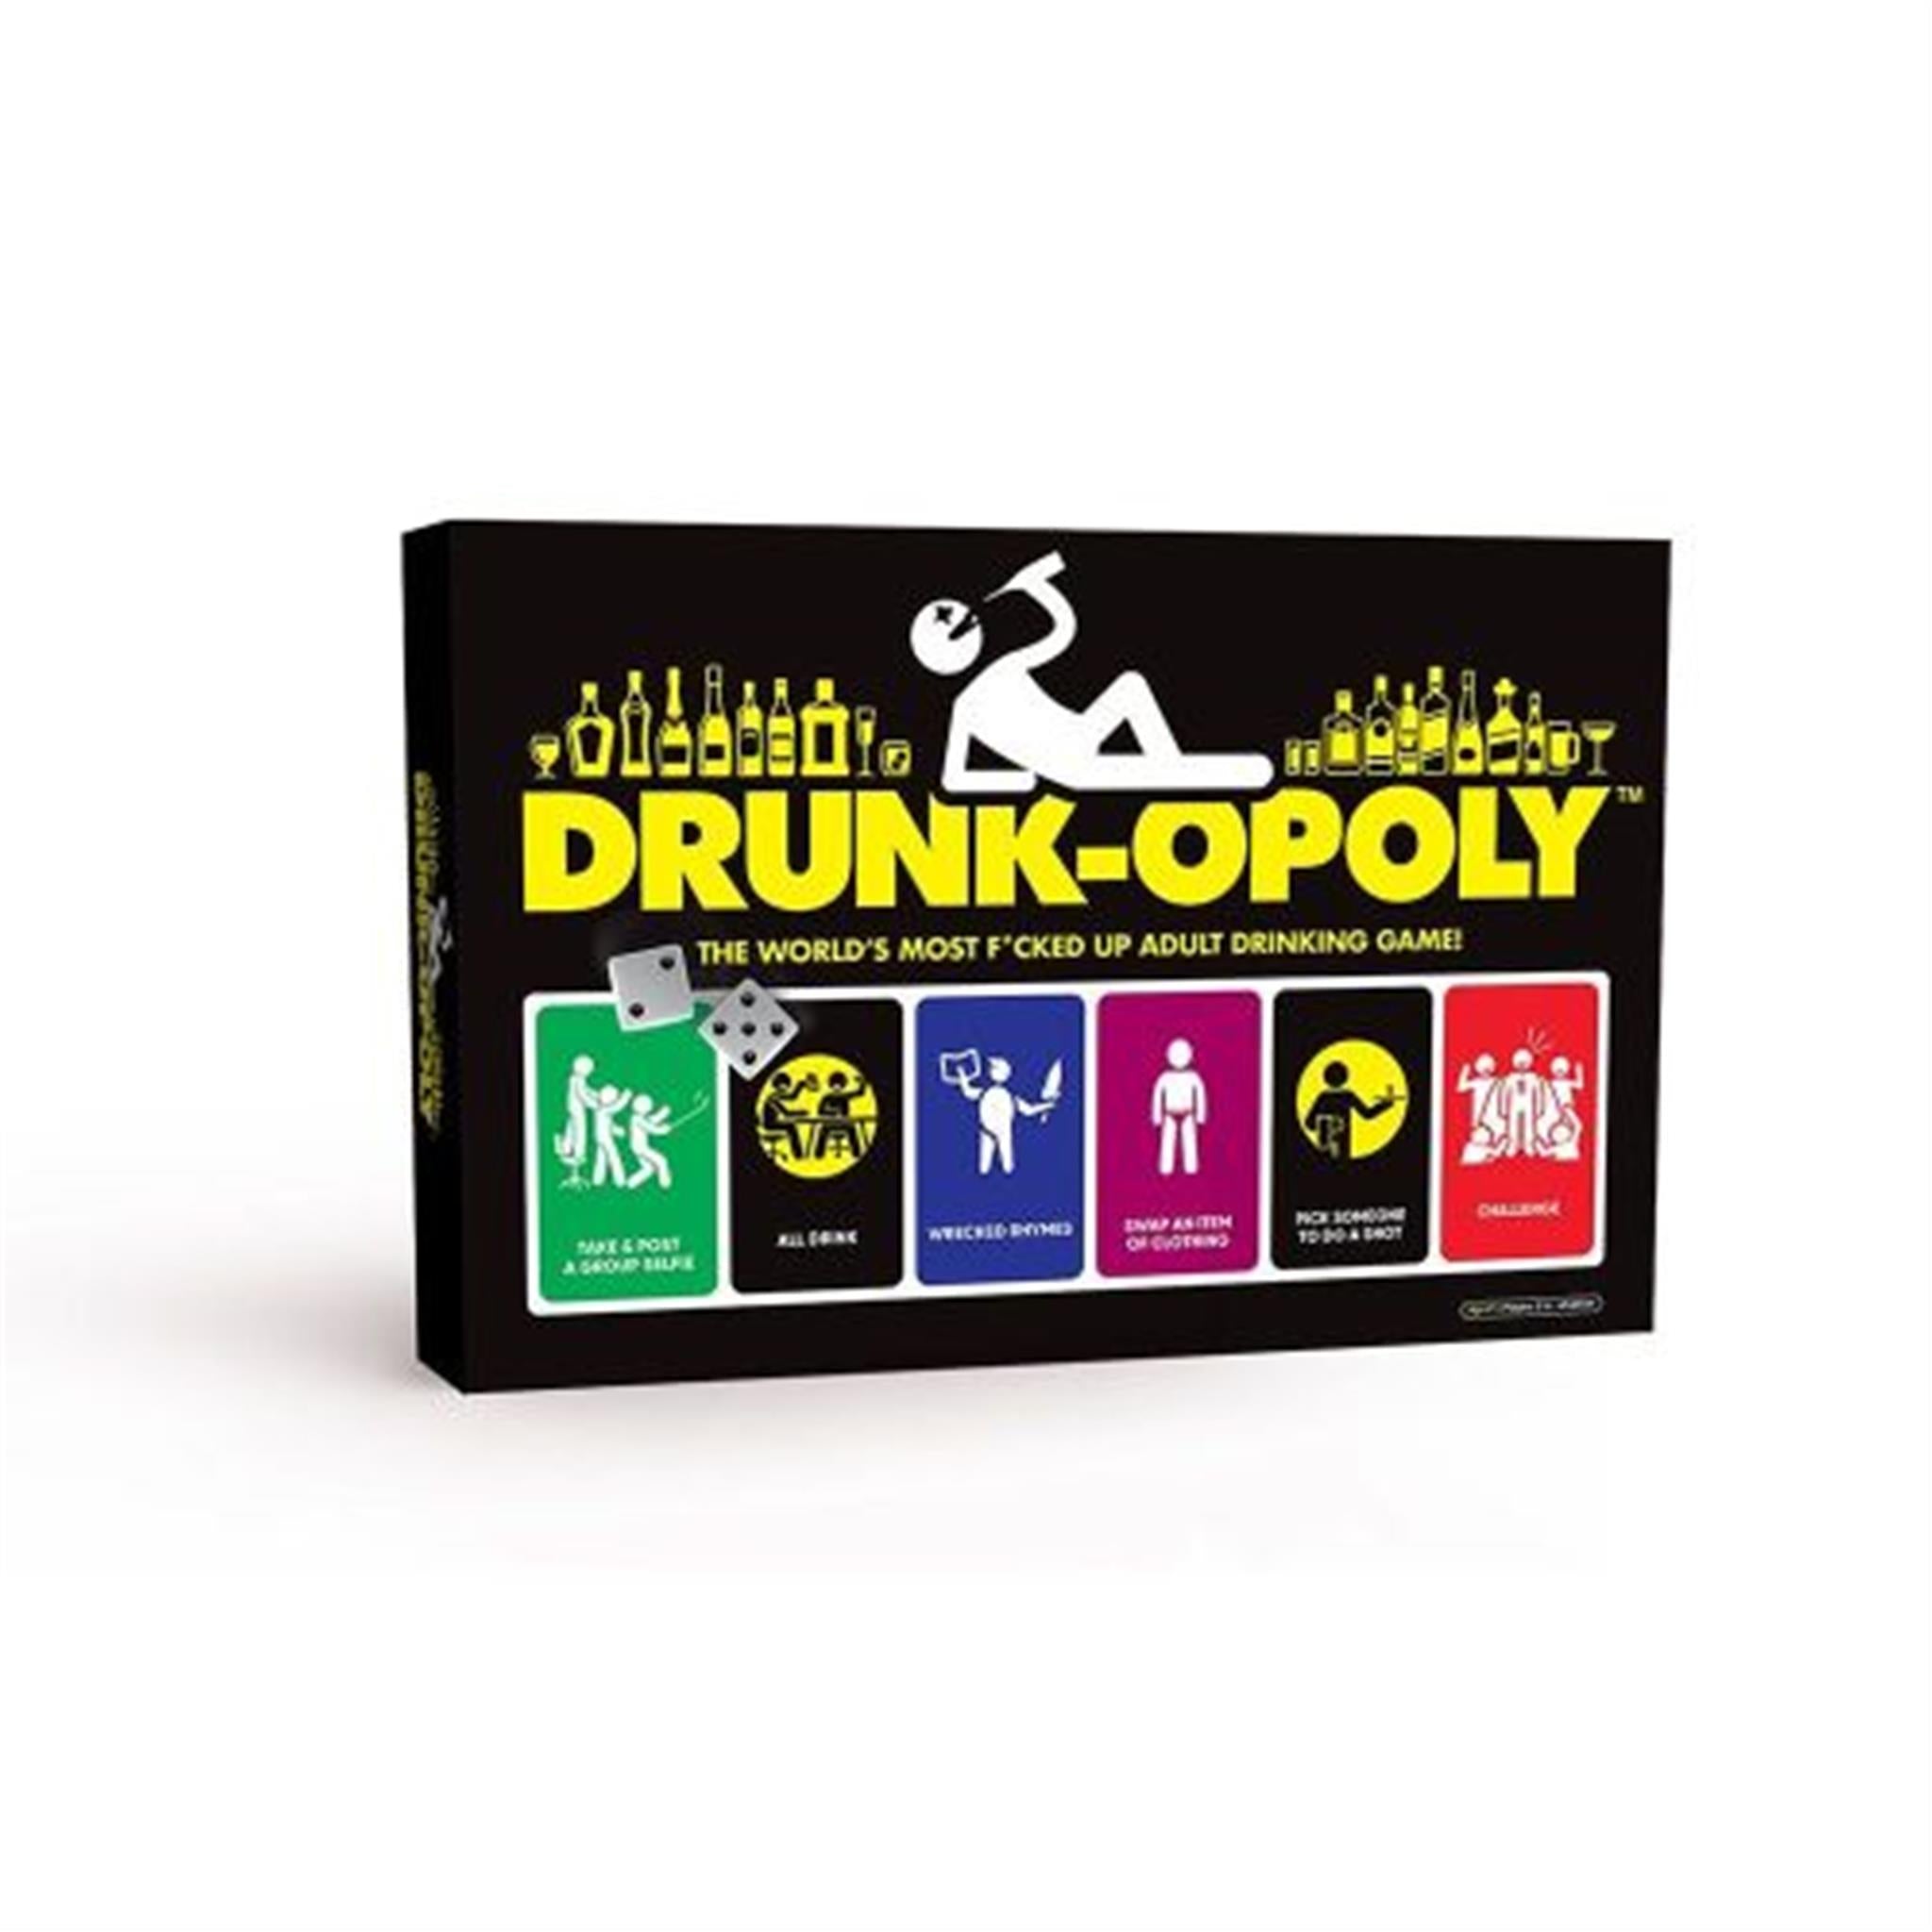 Drunk opoly